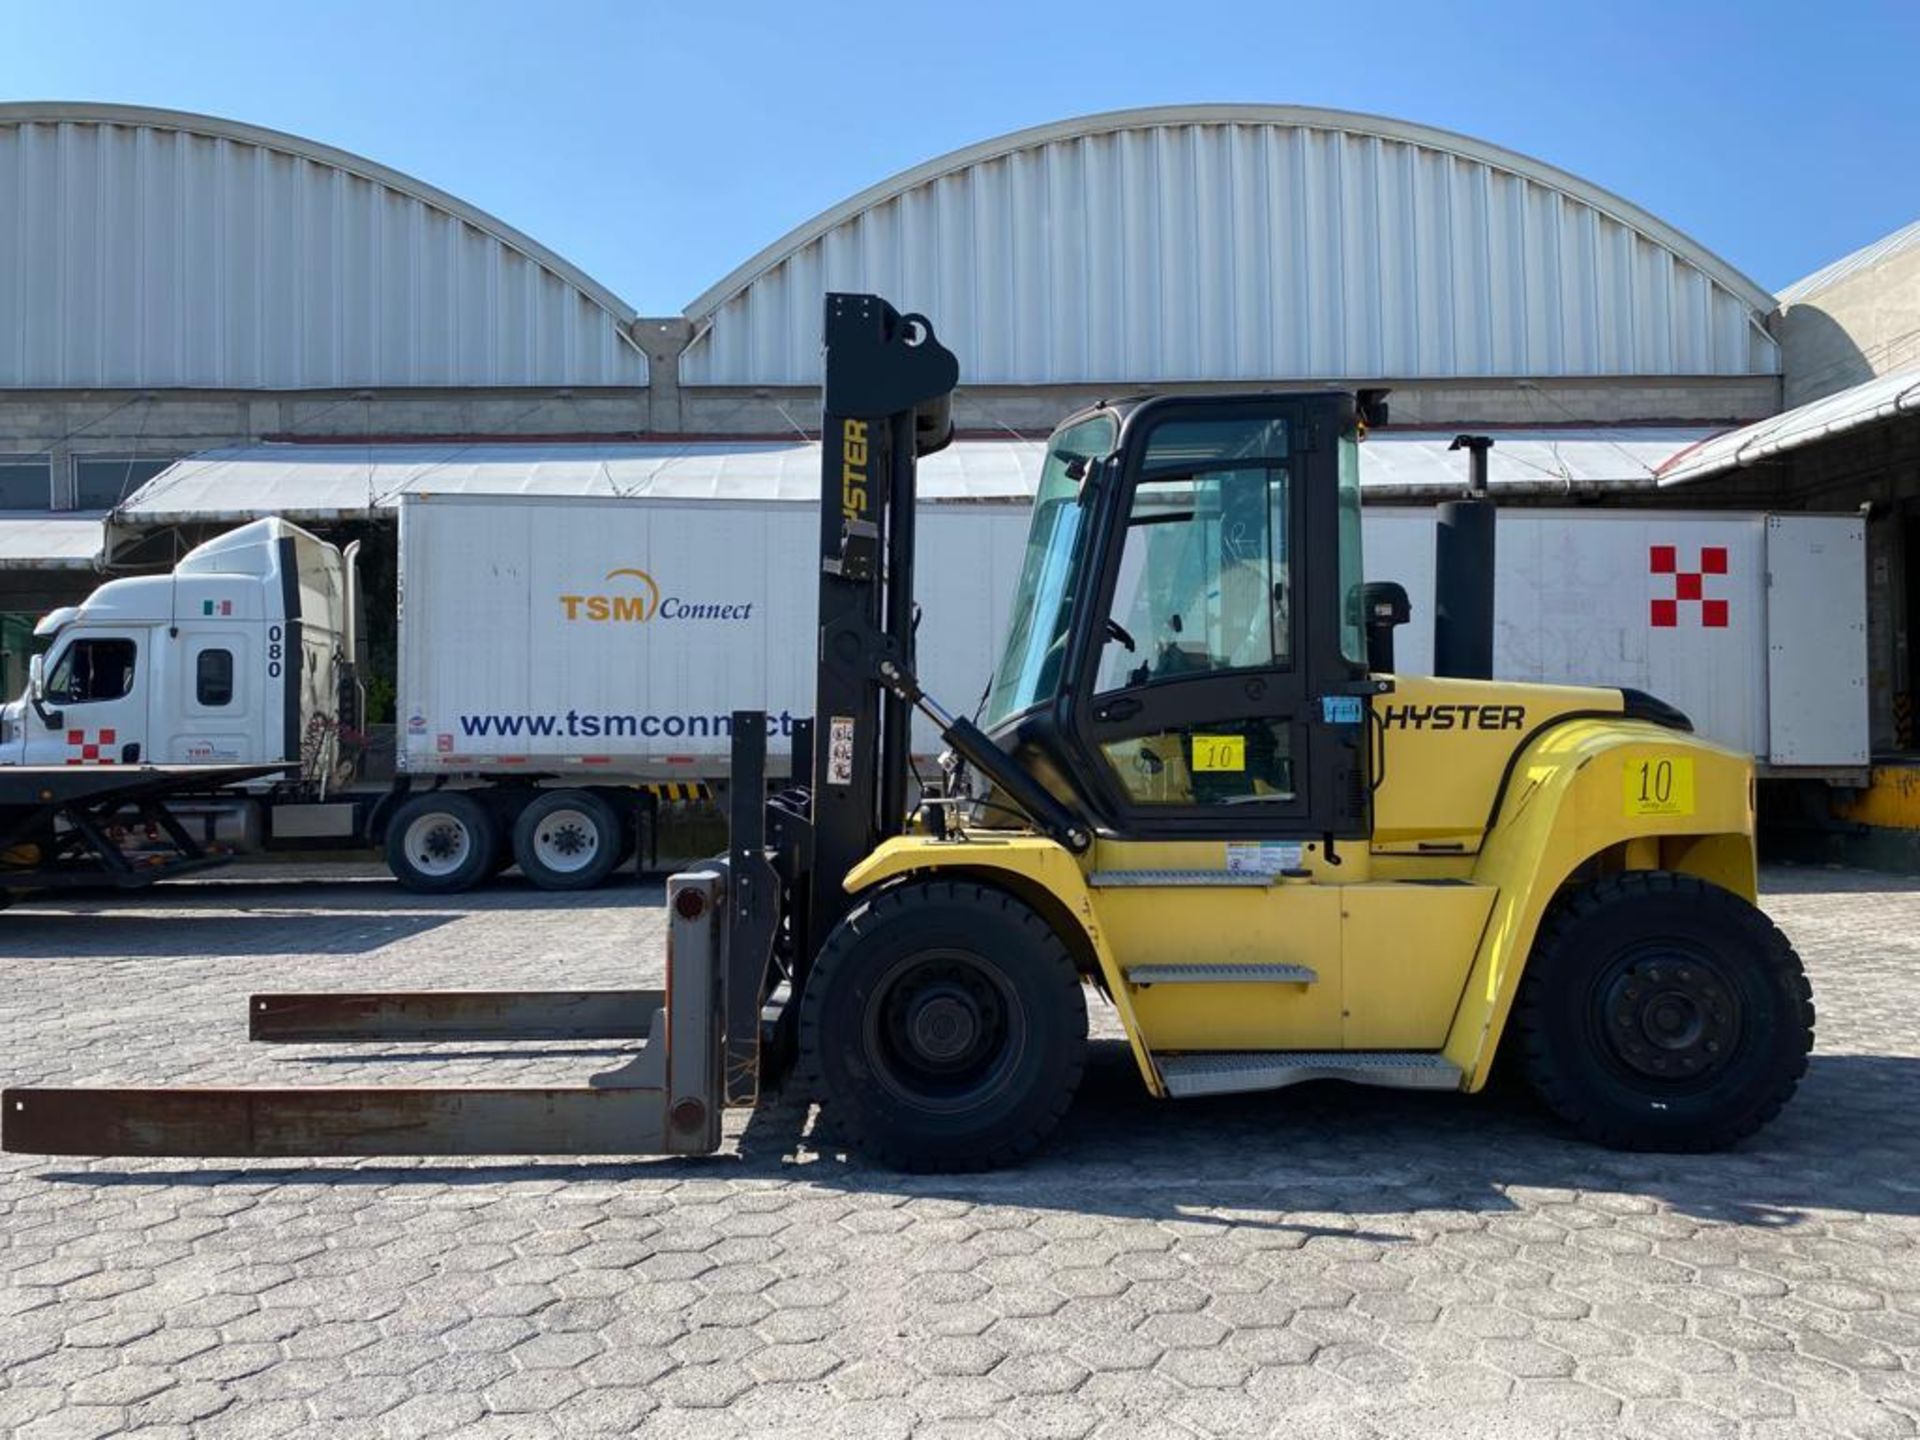 Hyster Forklift, model H210HD2, year 2017, 19,100 lb capacity, 2450 hours - Image 3 of 131